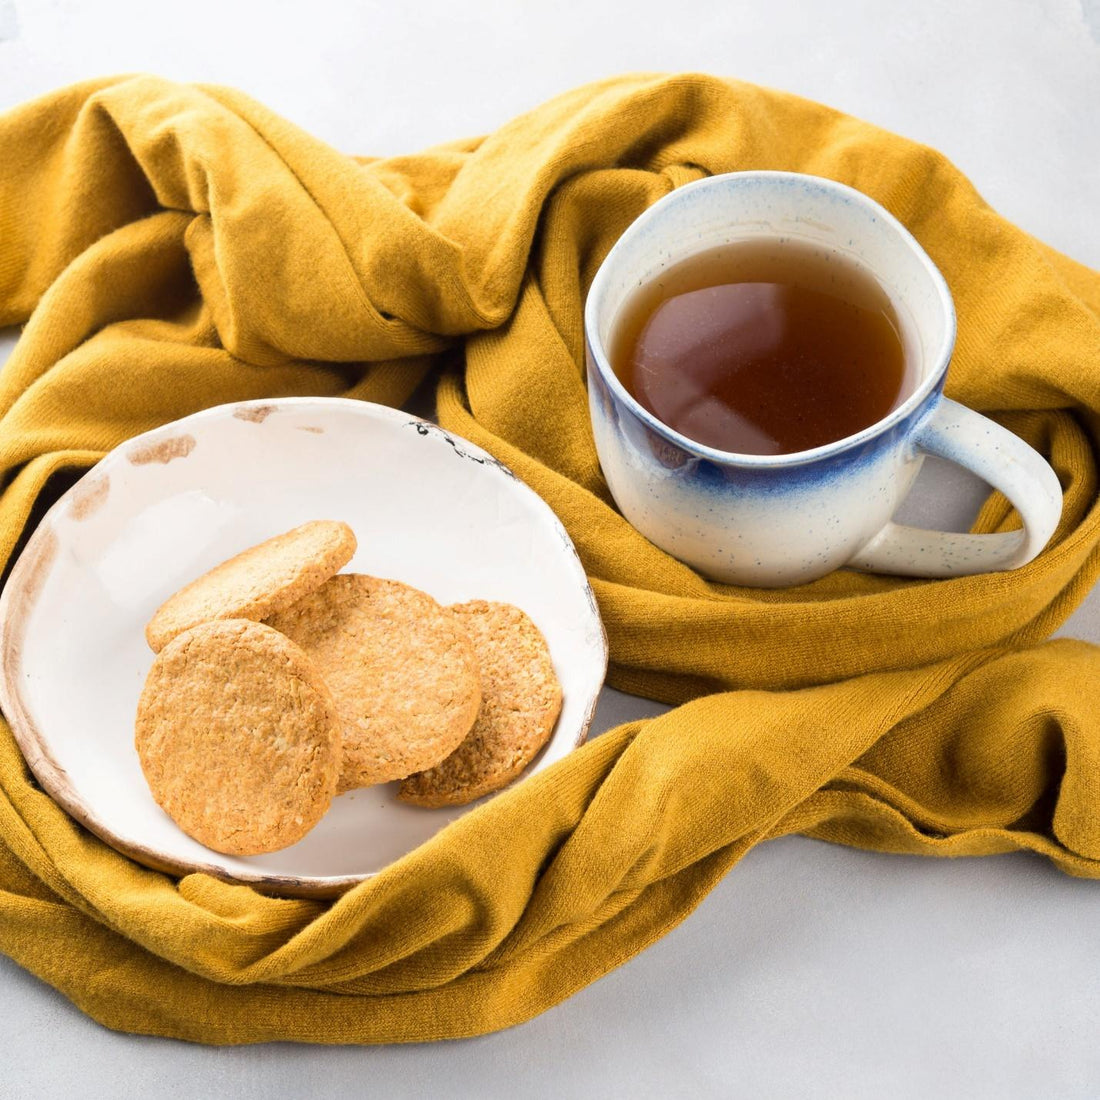 Deliciously Moist and Flavorful: Tea Cake Recipe with a Twist of Concentrated Sweet Tea